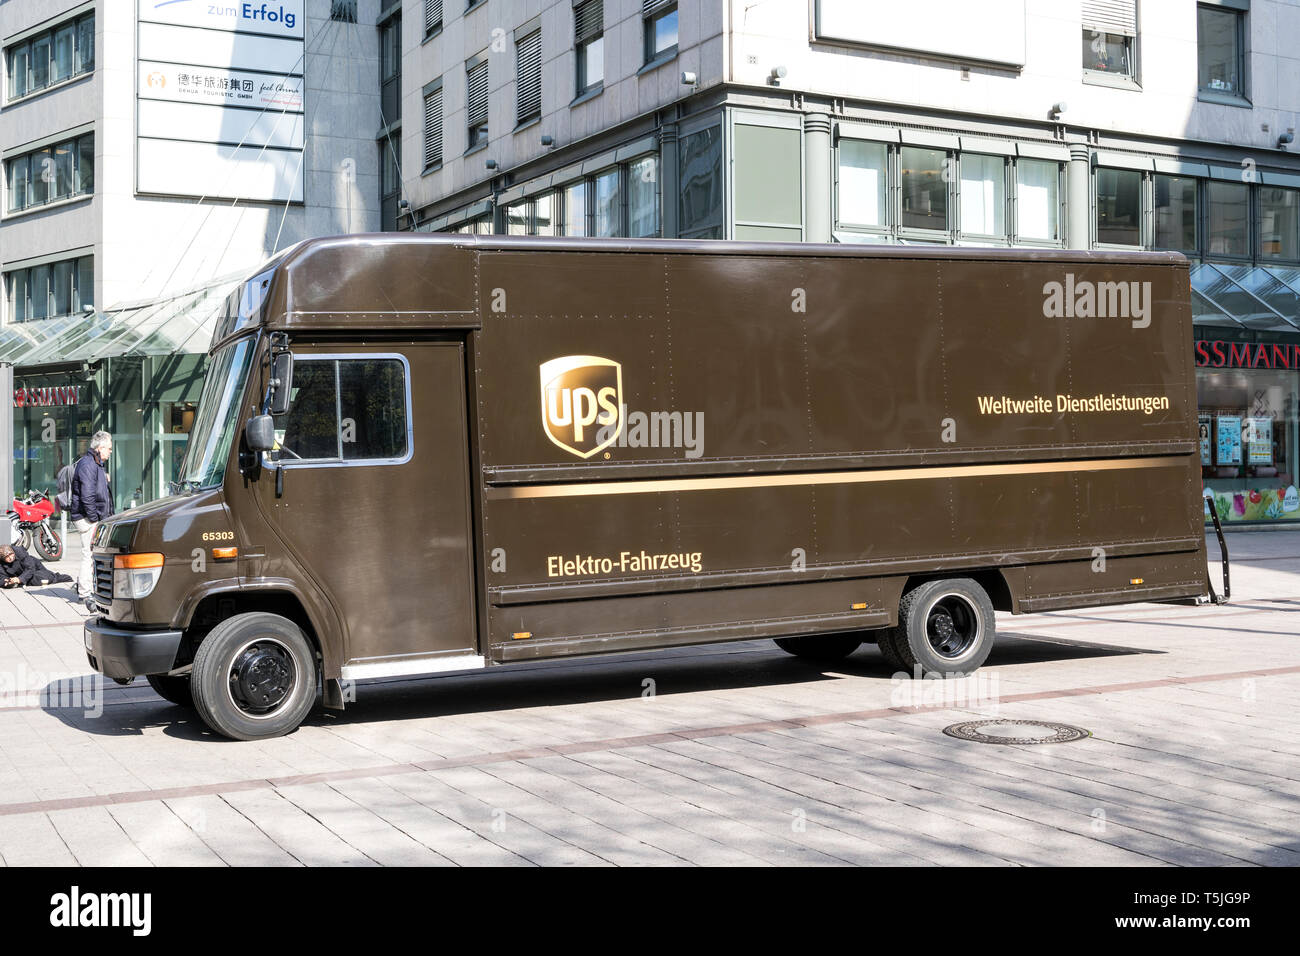 Electric powered UPS delivery van. UPS is the world's largest package delivery company and a provider of supply chain management solutions. Stock Photo